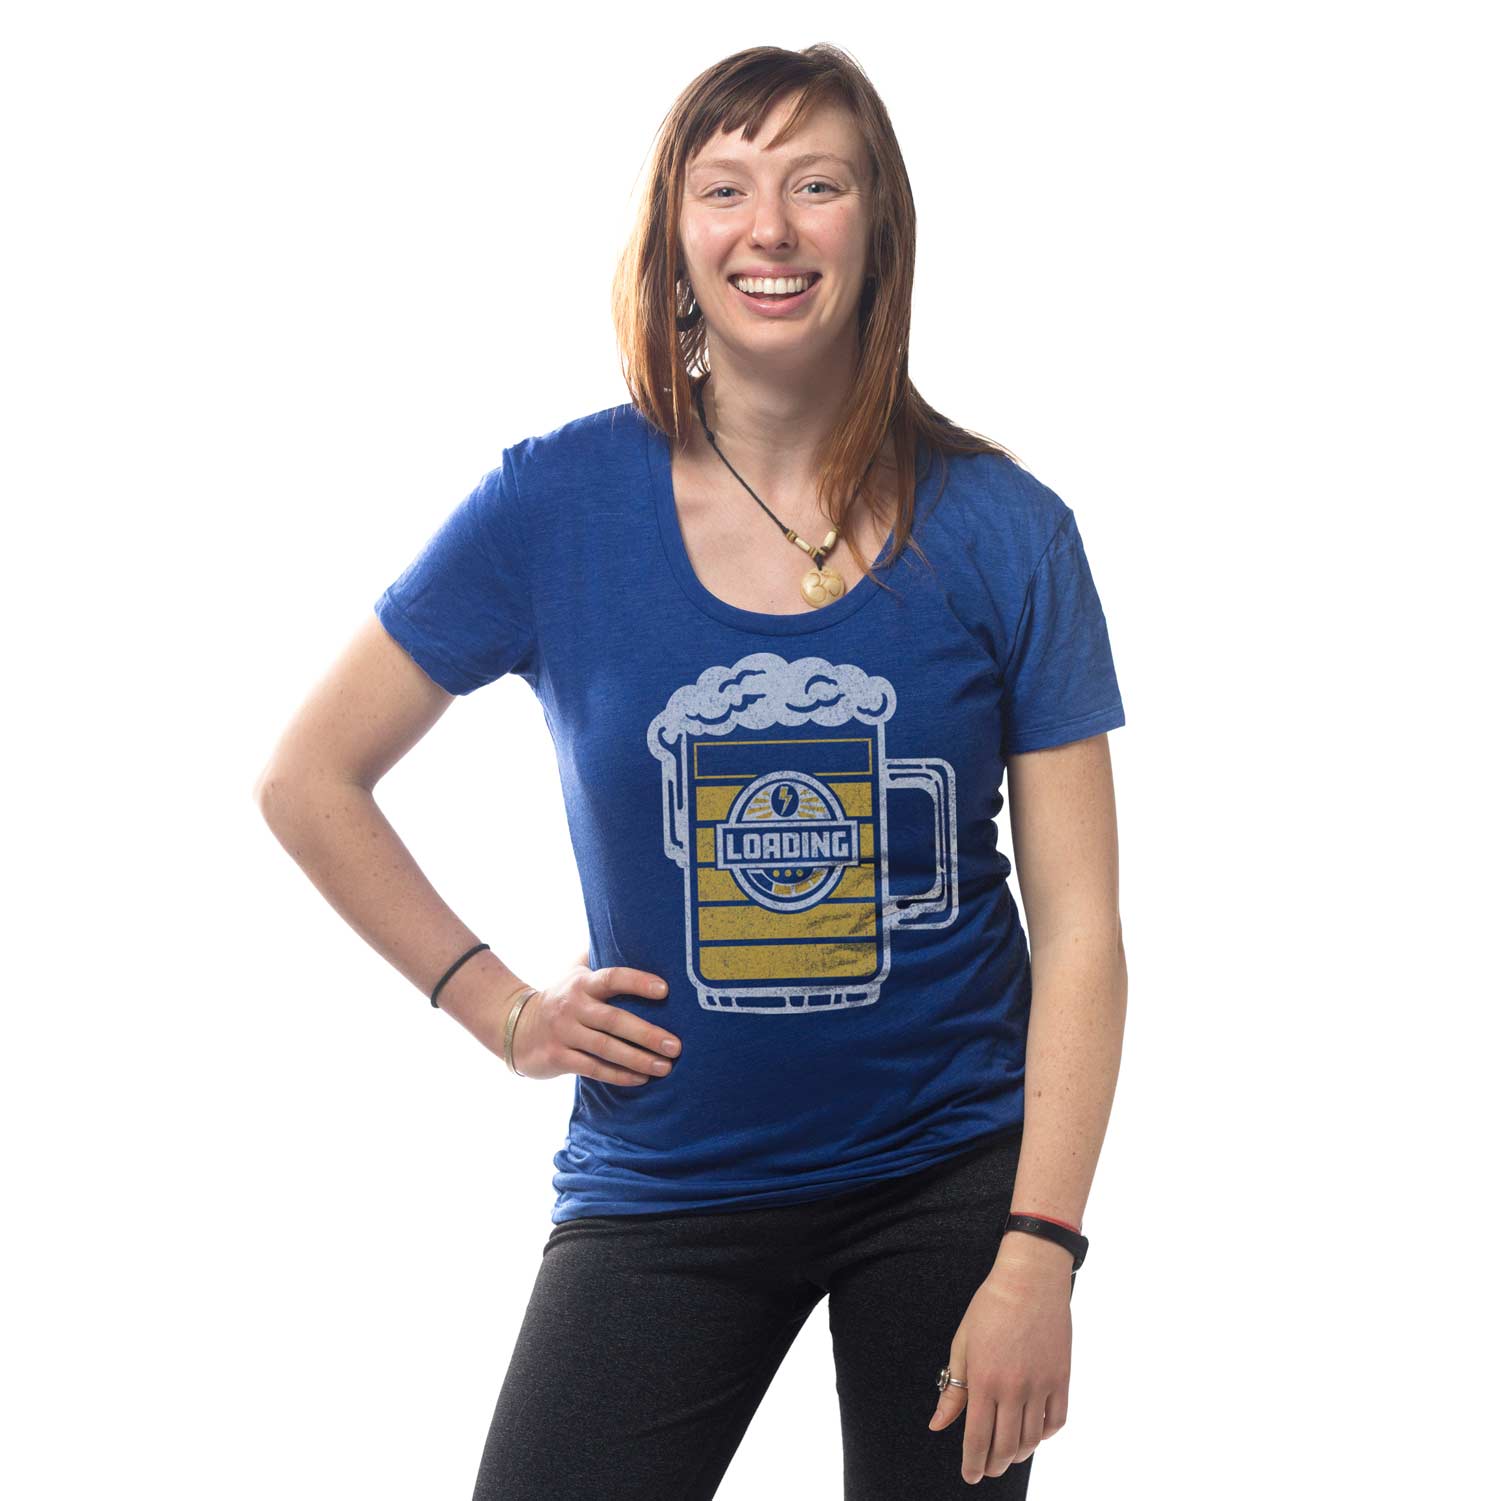 Women's Beer Loading Vintage Inspired Scoopneck T-shirt | Cool Retro Tee with Funny Drinking Graphic | Solid Threads